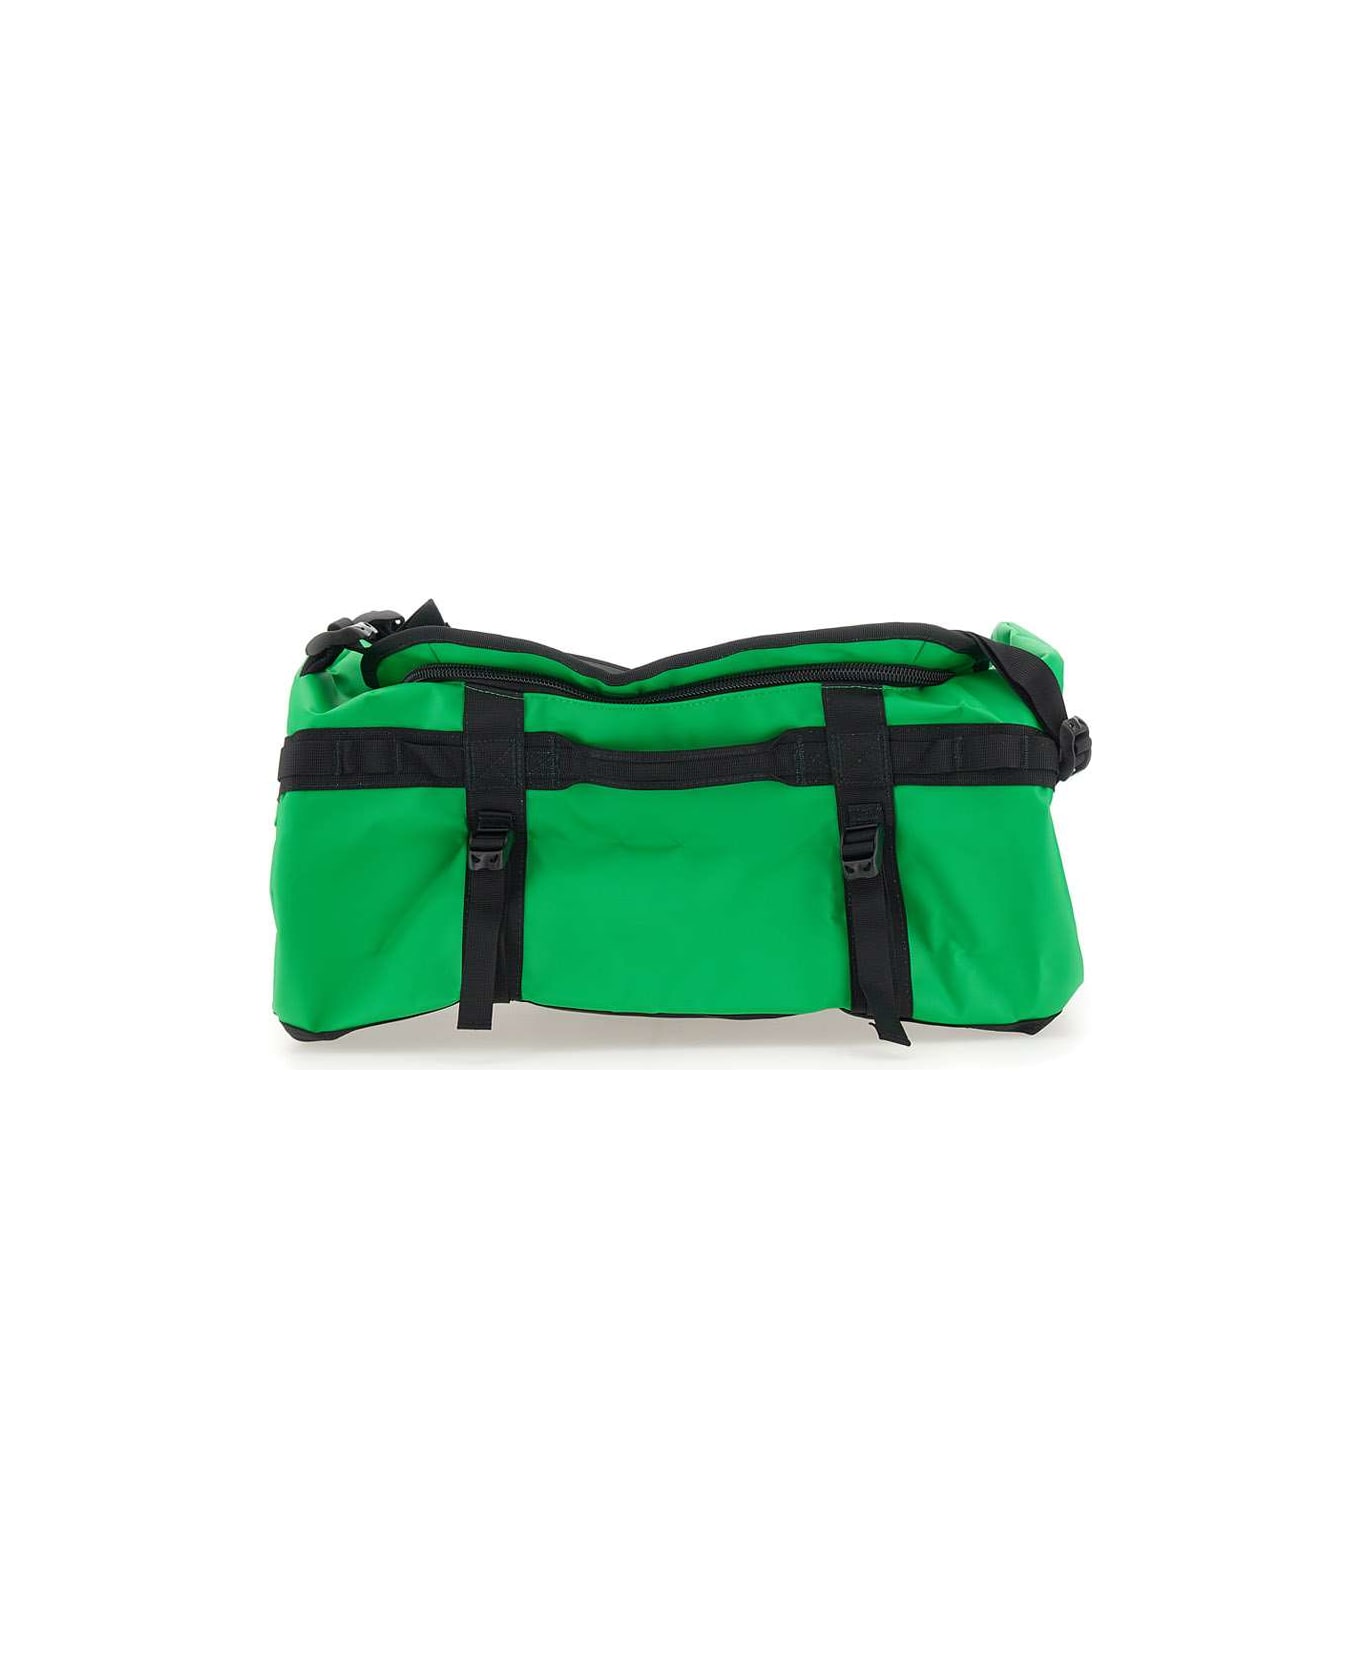 The North Face "base Camp Duffel" Travel Bag - black/green トラベルバッグ